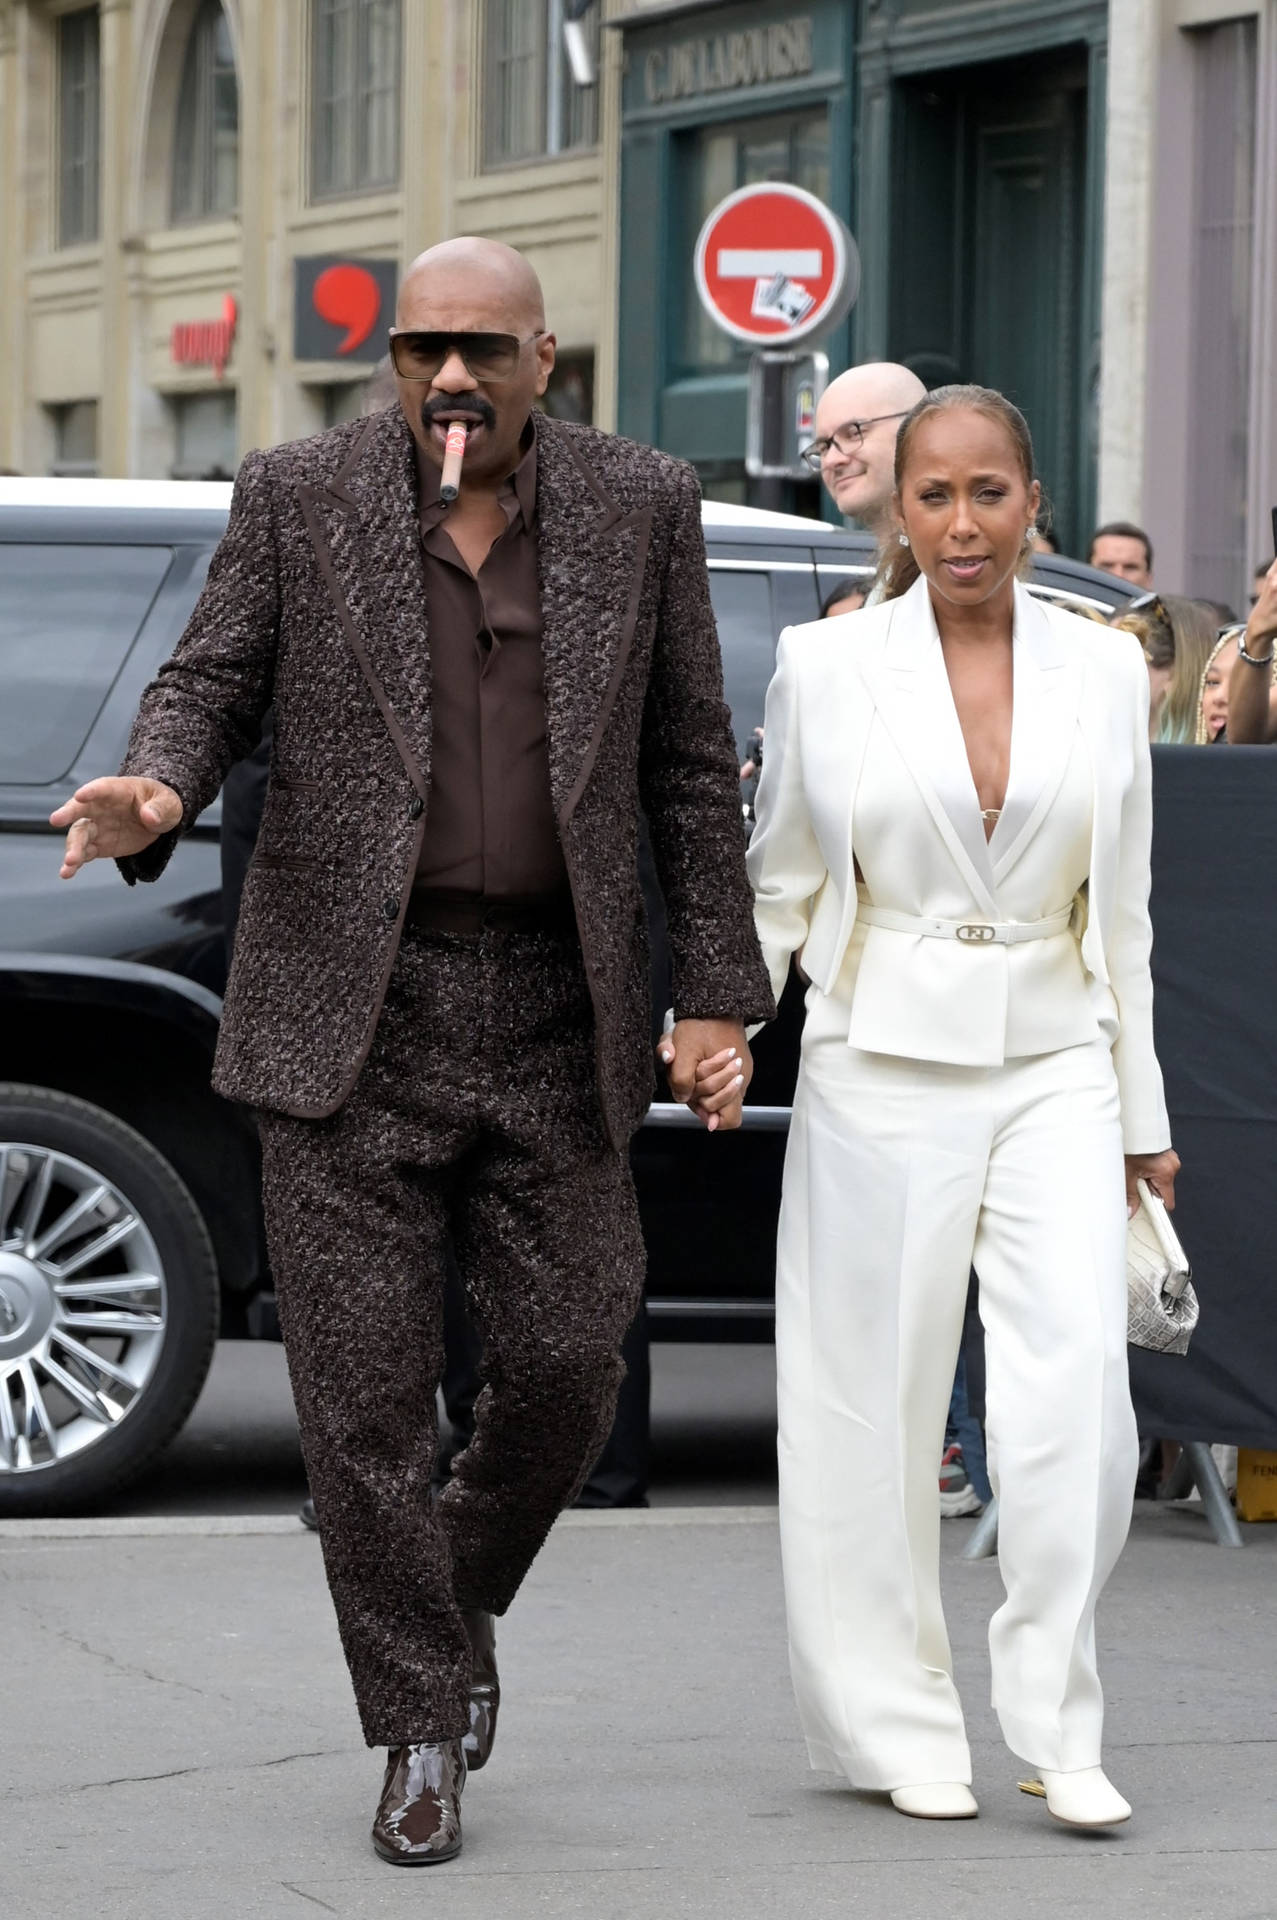 Steve Harvey With A Cigar And His Wife Background